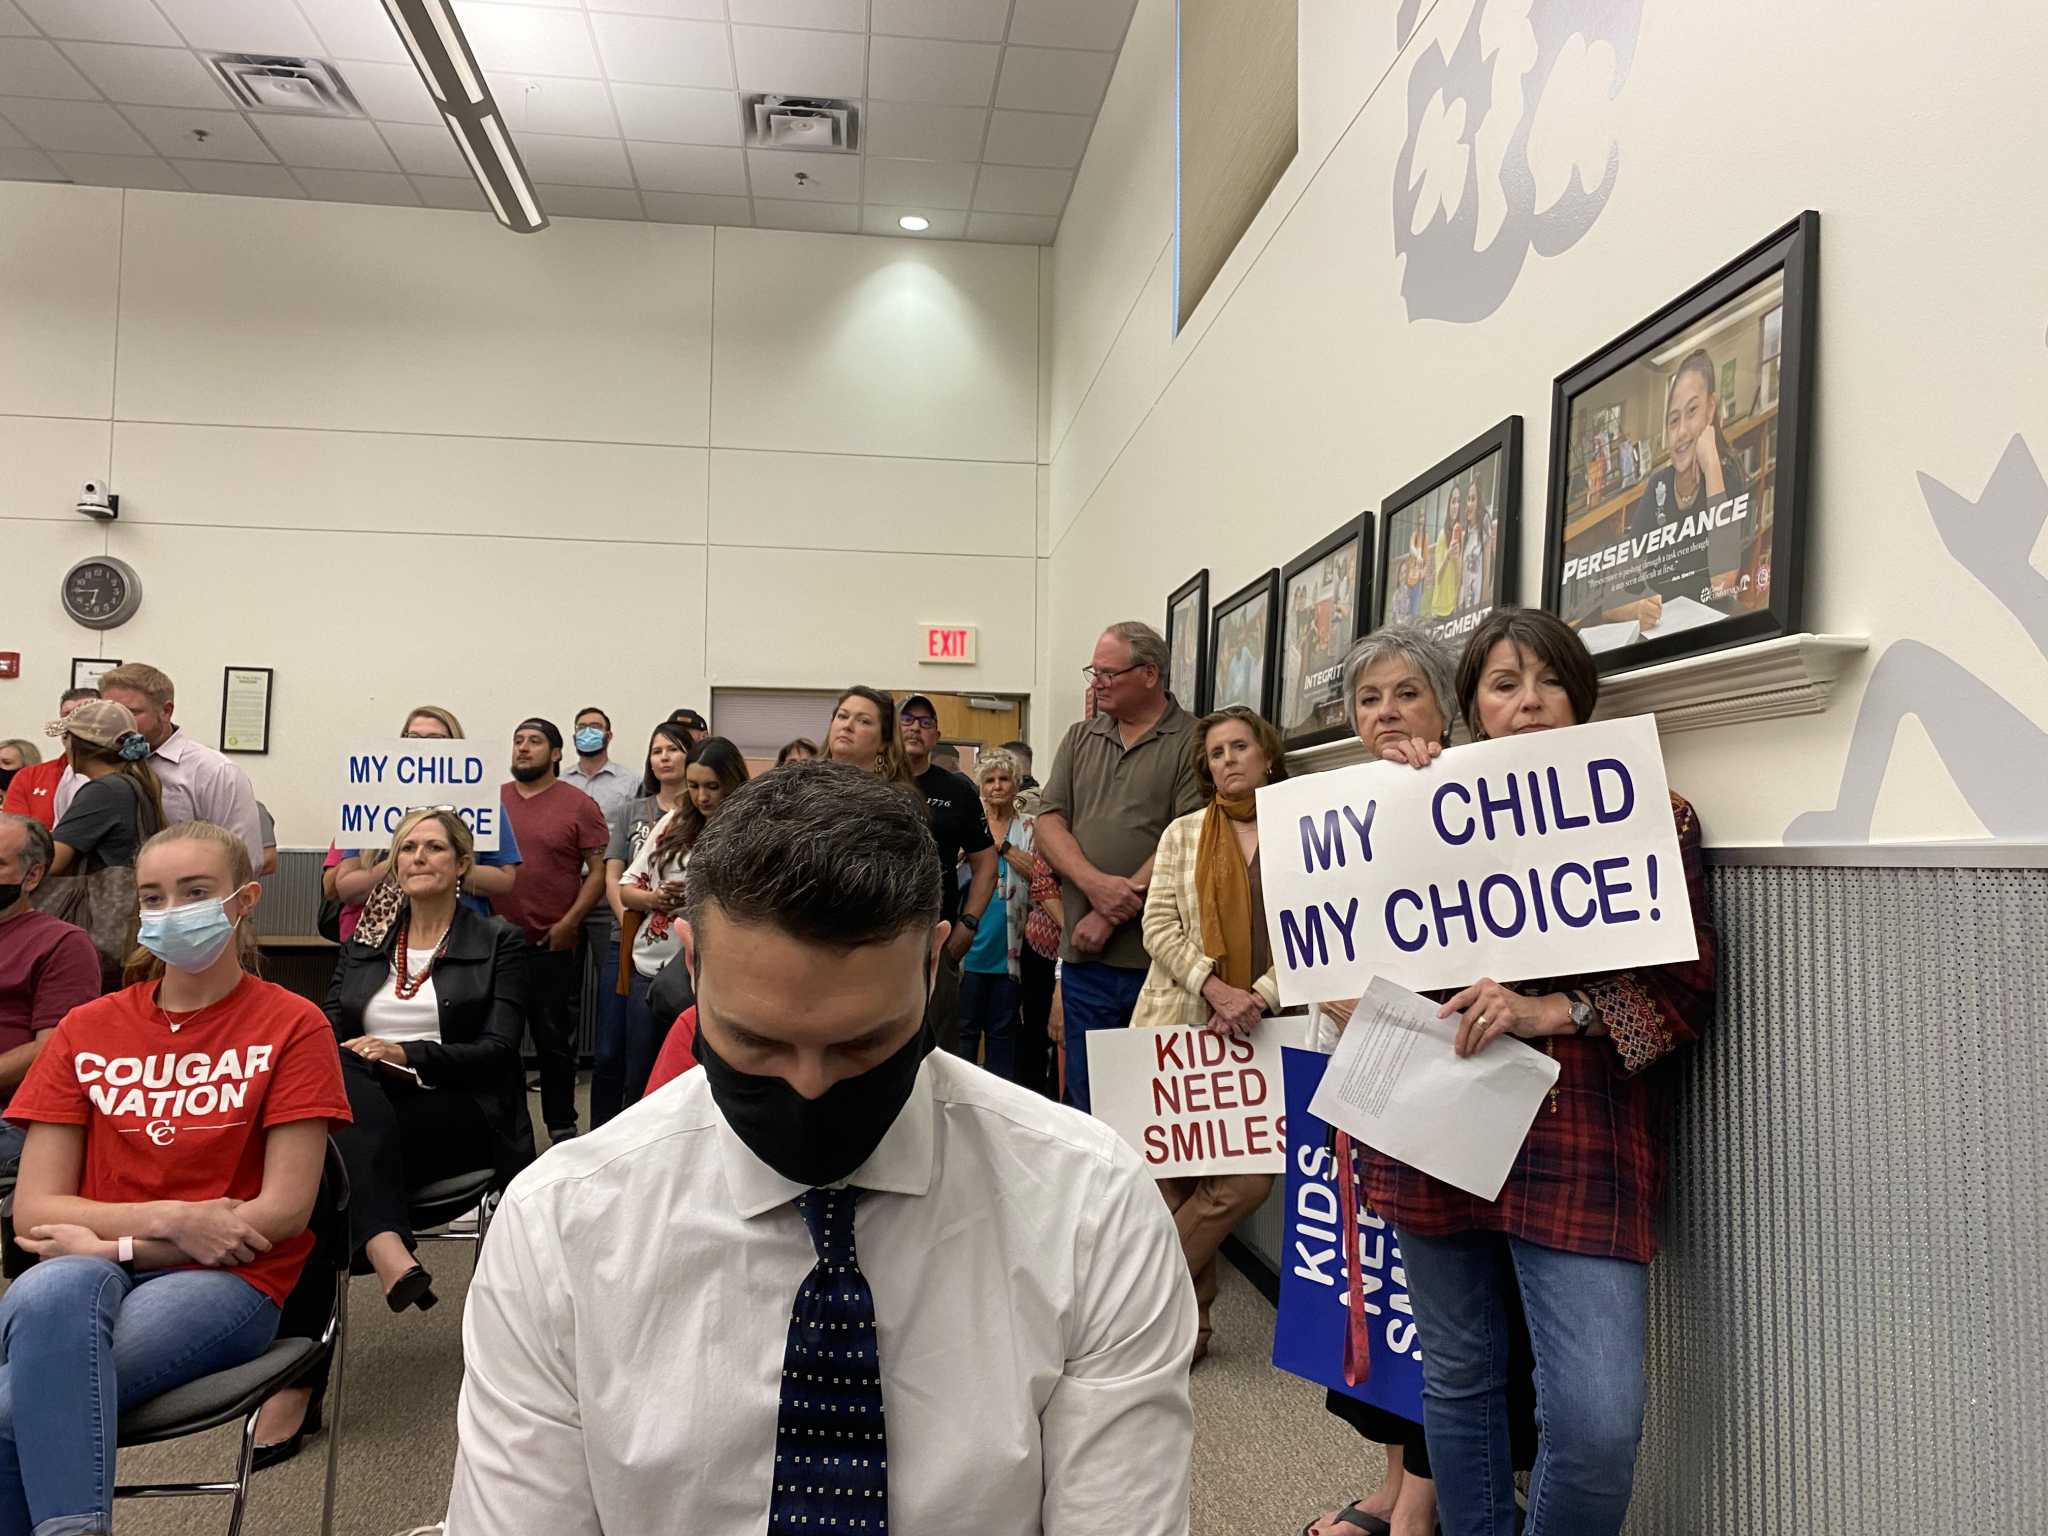 Comal Isd Calendar 2022 Separation Over Our Own Safety' — Comal Isd Board Gets Earful From Parents,  Students Over Mask Policy